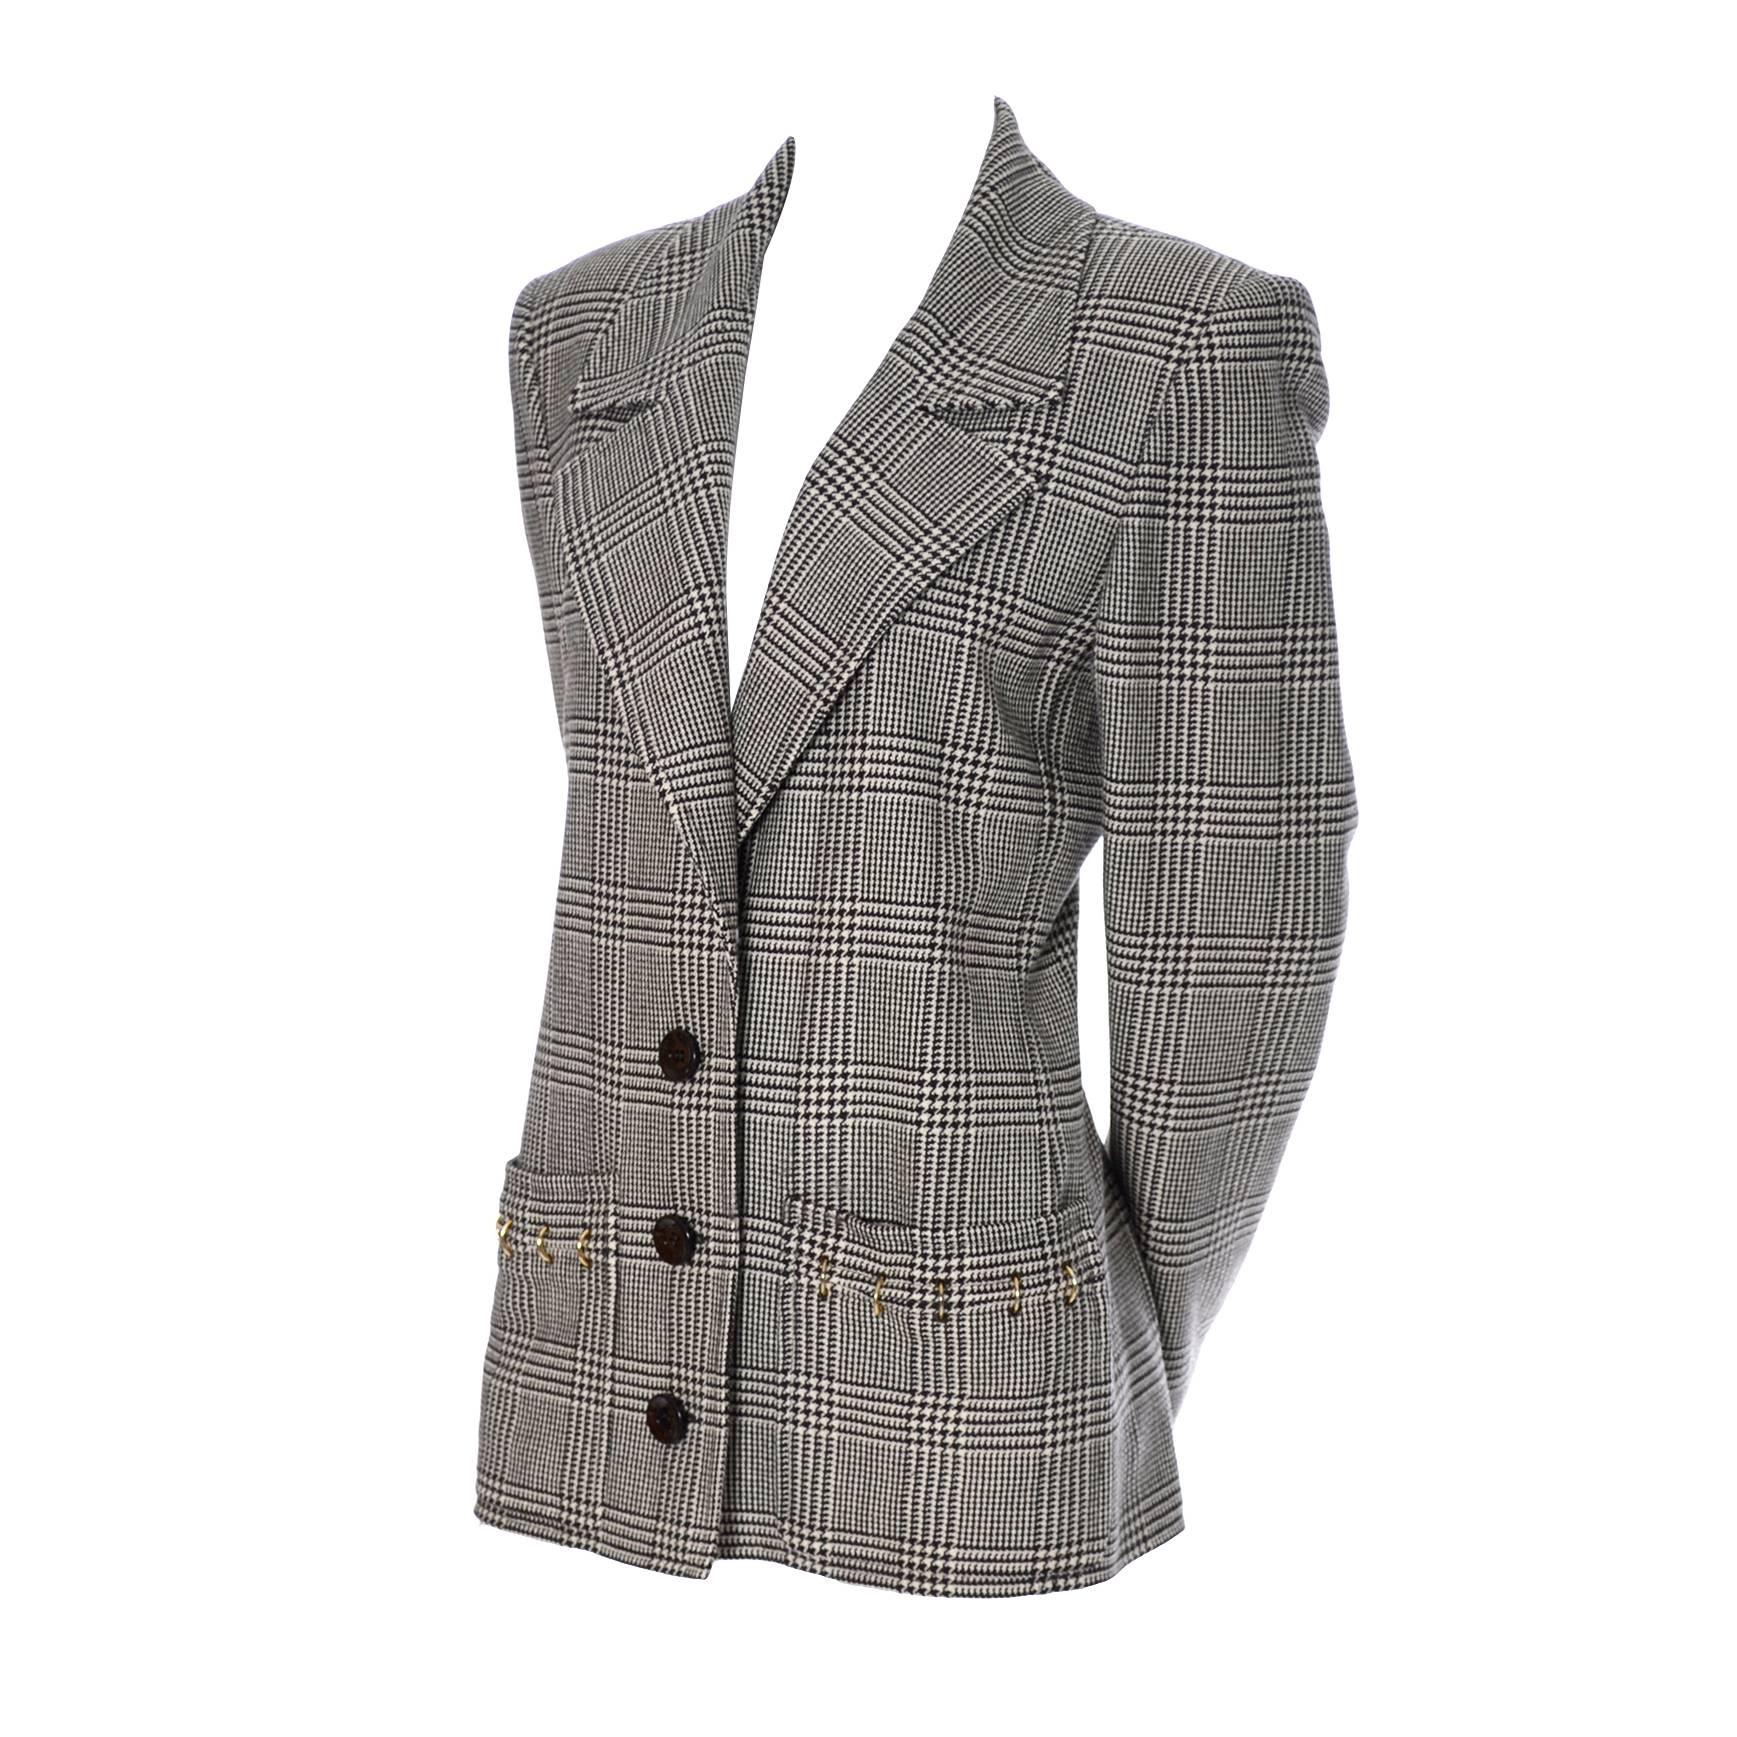 Valentino Boutique Vintage Plaid Wool Blazer Jacket with Metal Rings